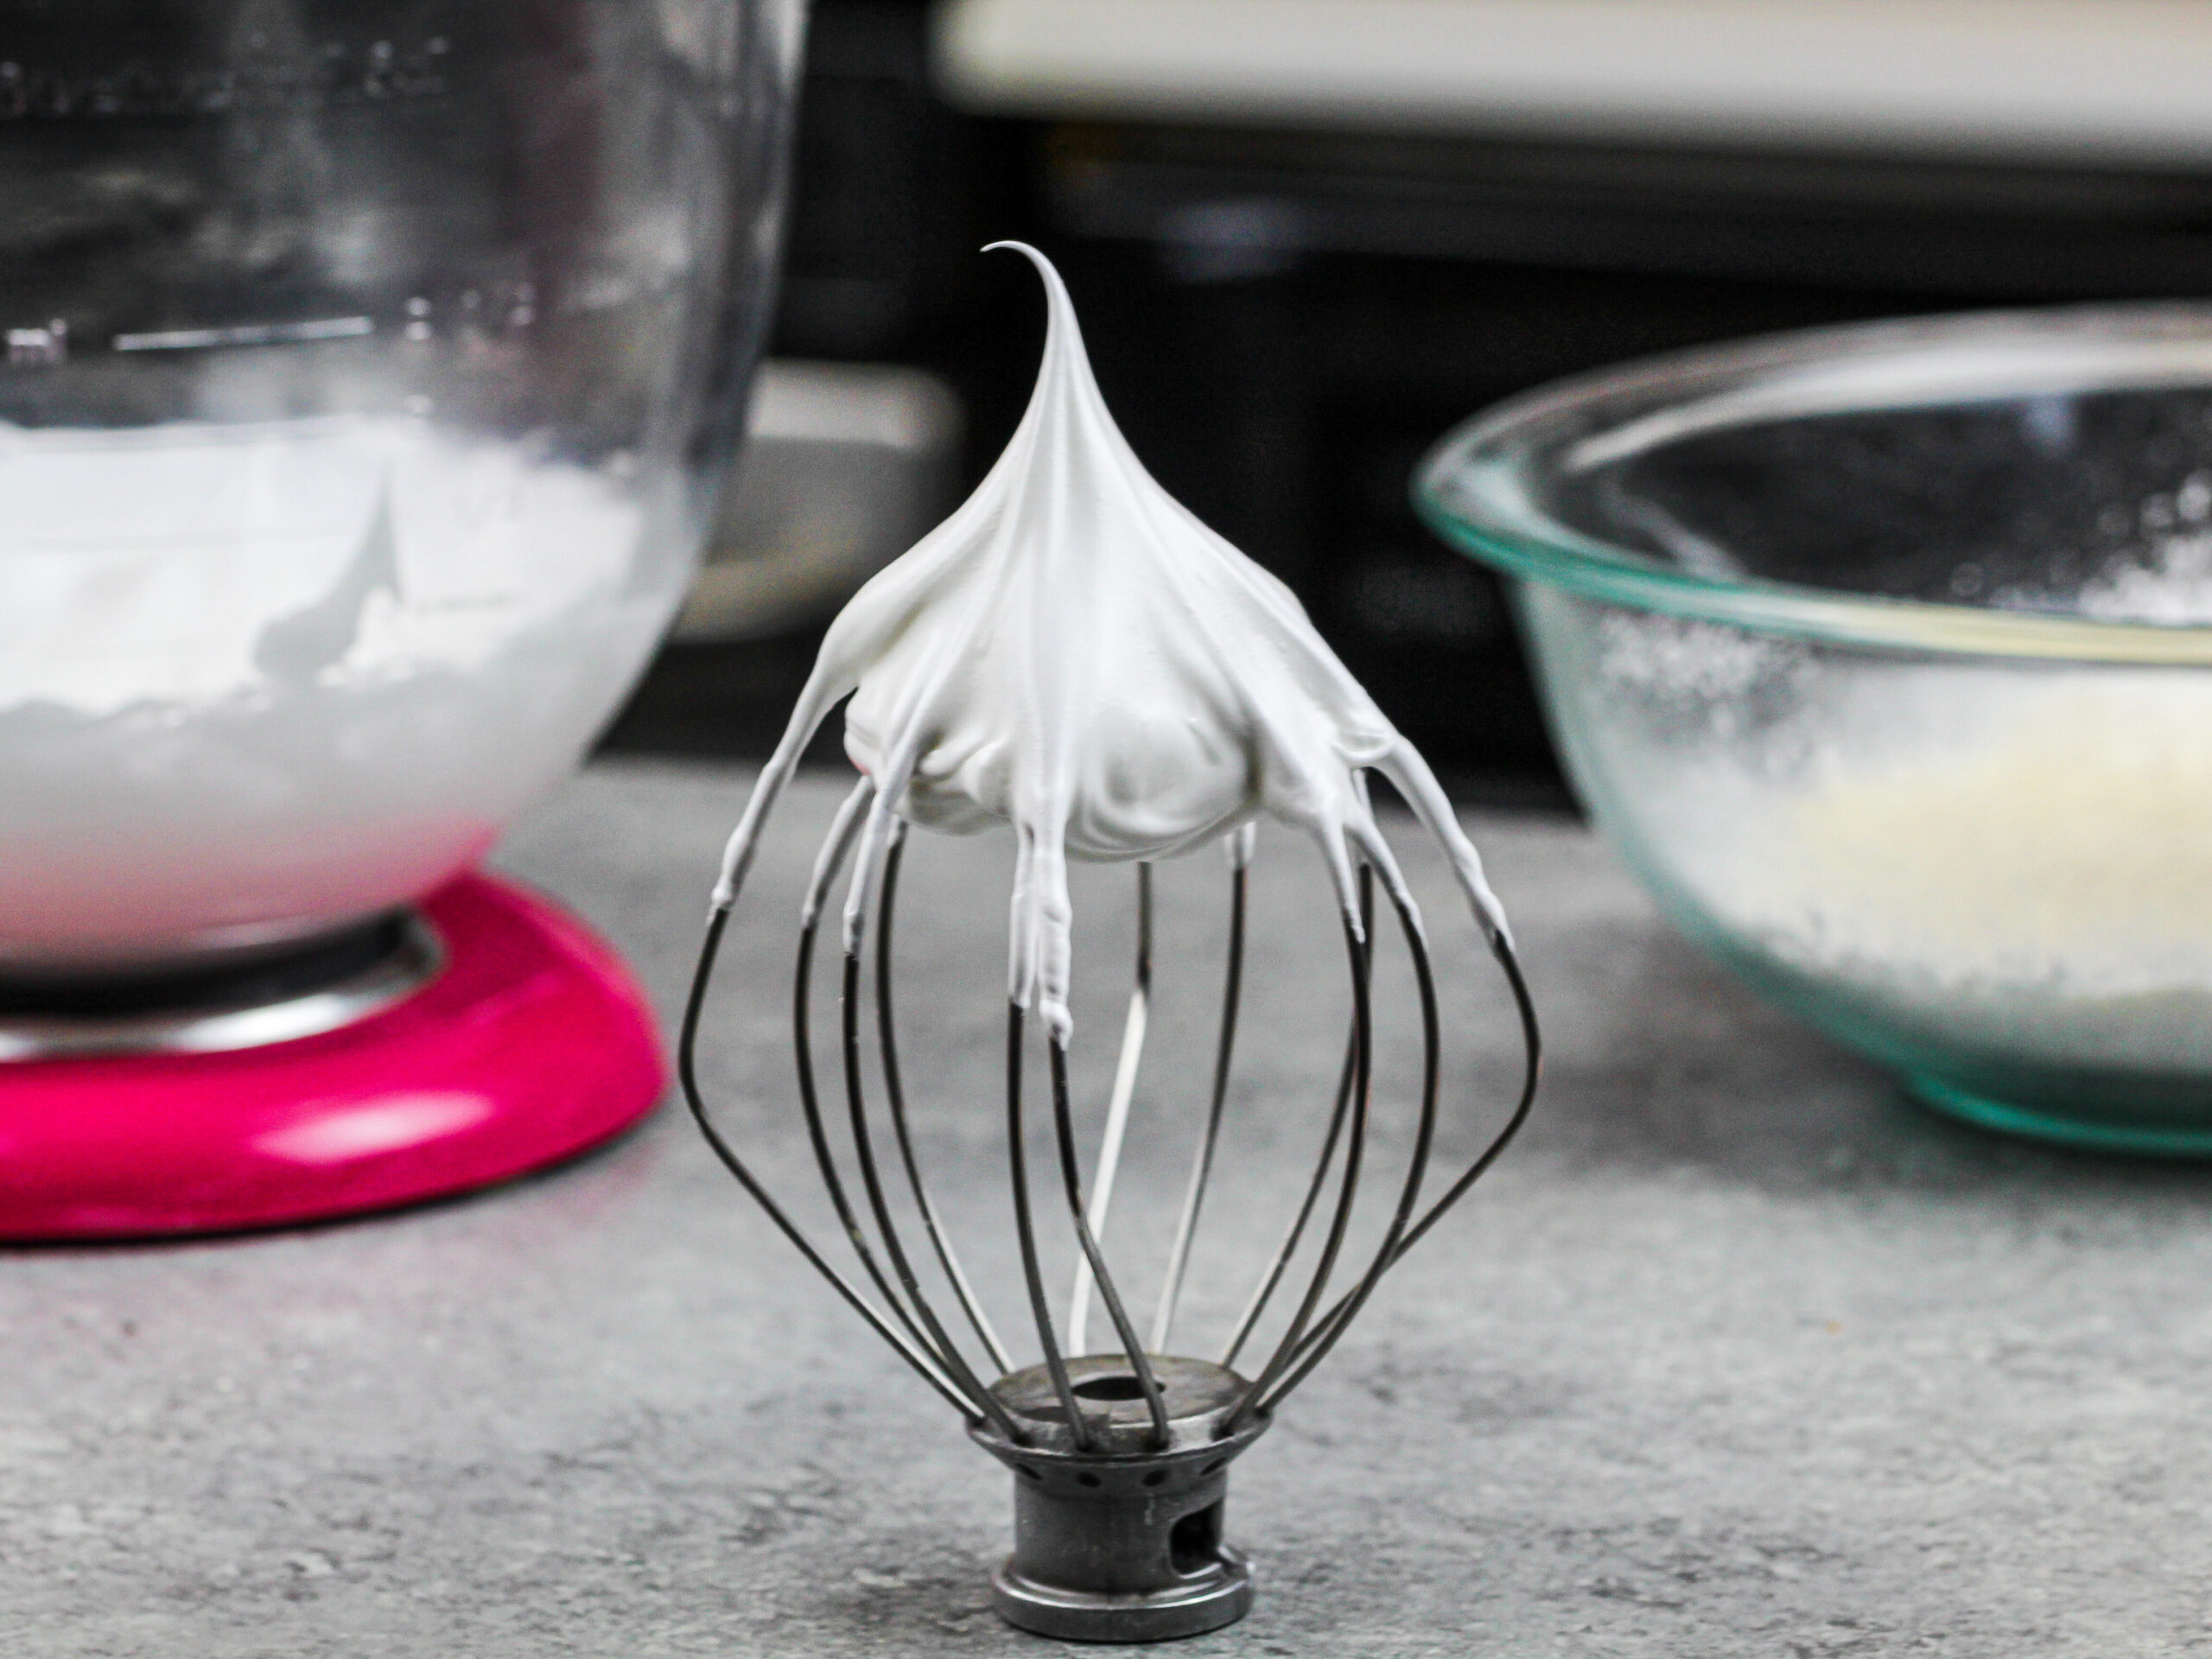 image of french meringue on a whisk of a kitchenaid mixer that has stiff peaks